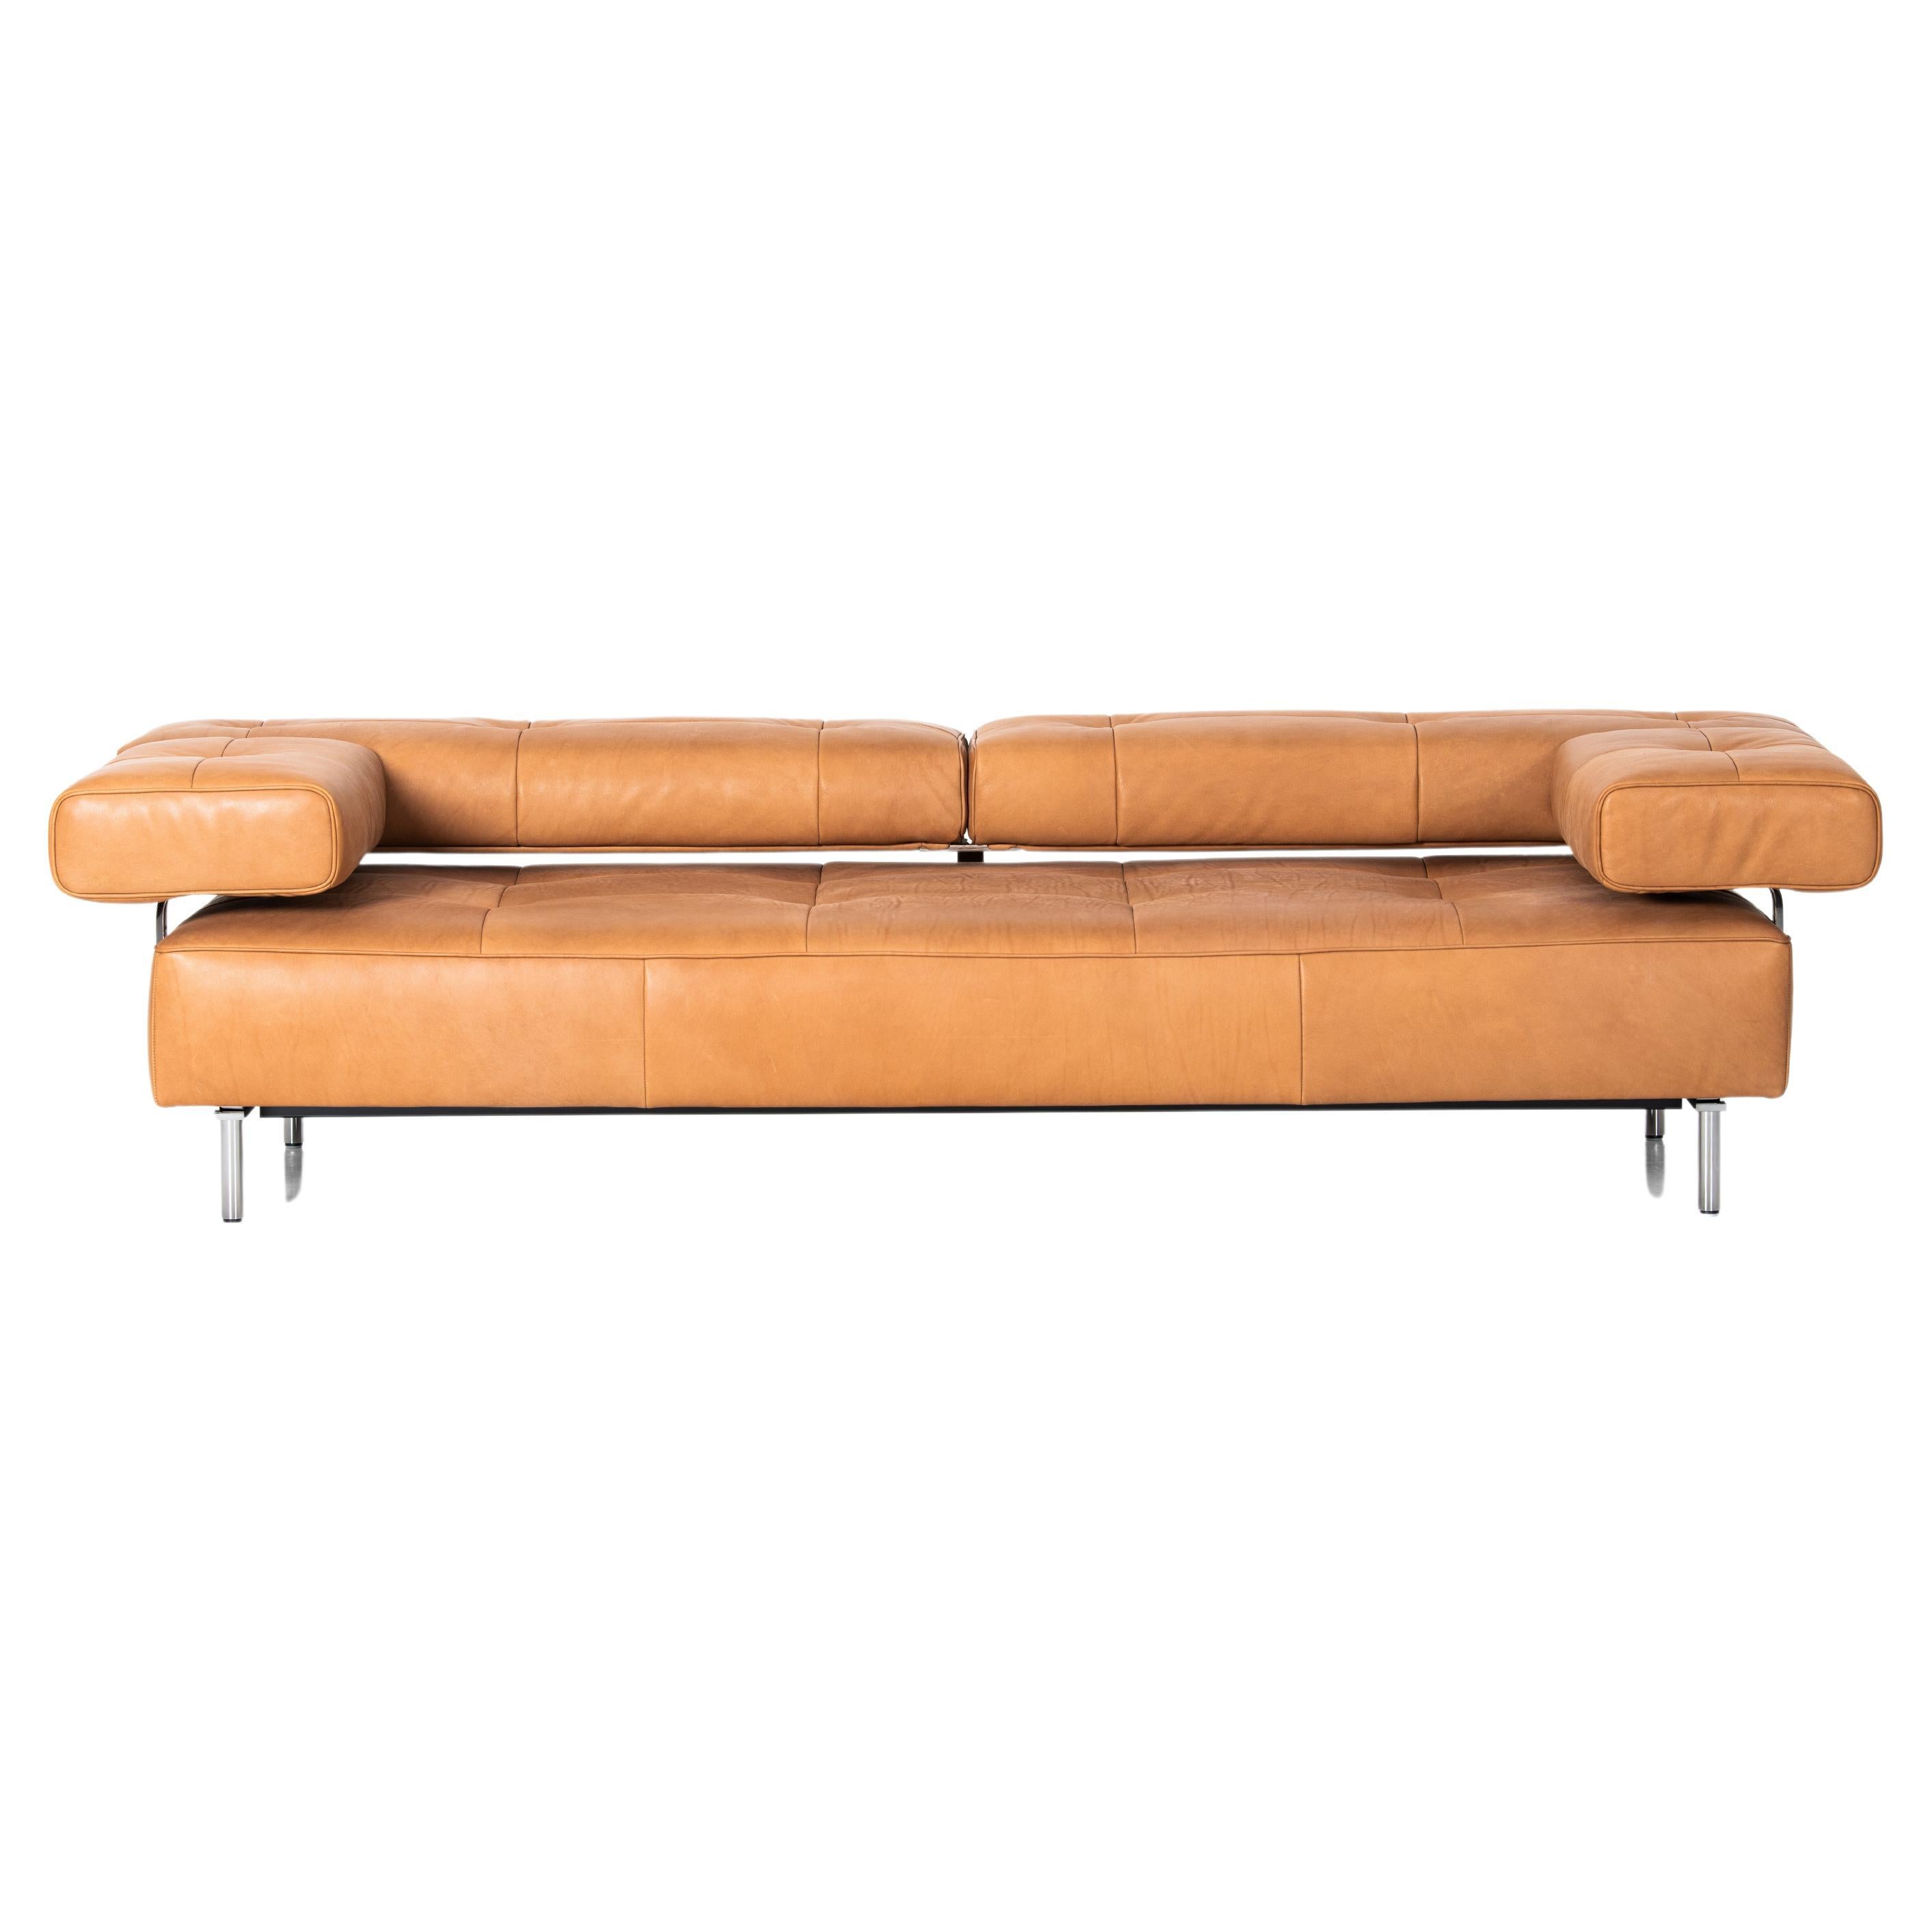 De Sede DS-880/23 Comfortable Sofa in Cuoio Leather Seat and Back Upholstery For Sale